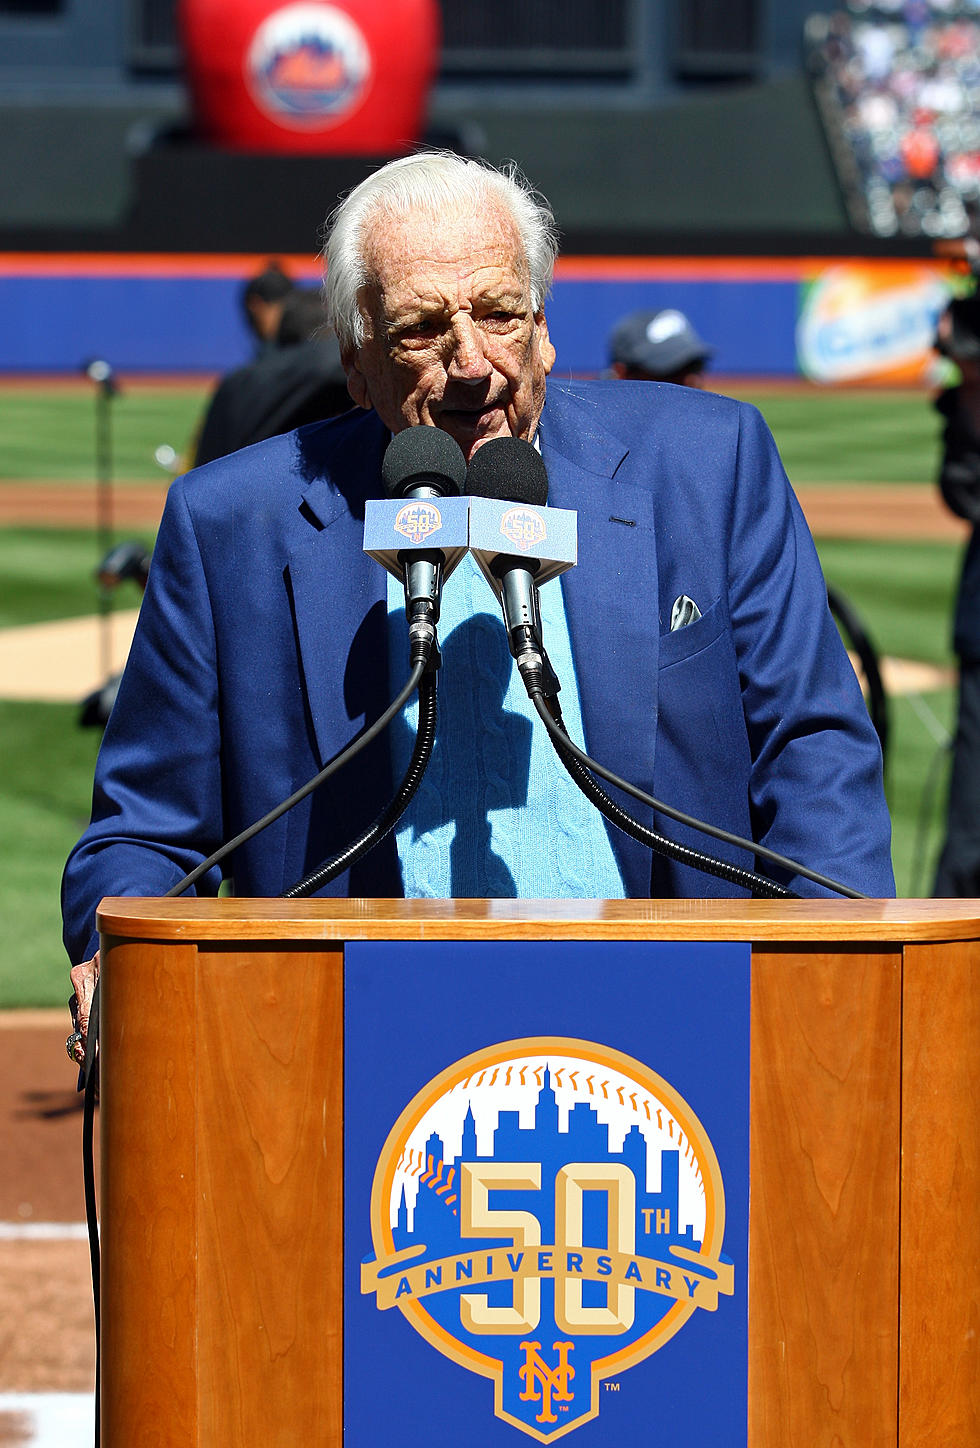 Mets Broadcasting Legend Ralph Kiner Dead at 91 – Who’s Your Favorite Sports Announcer?